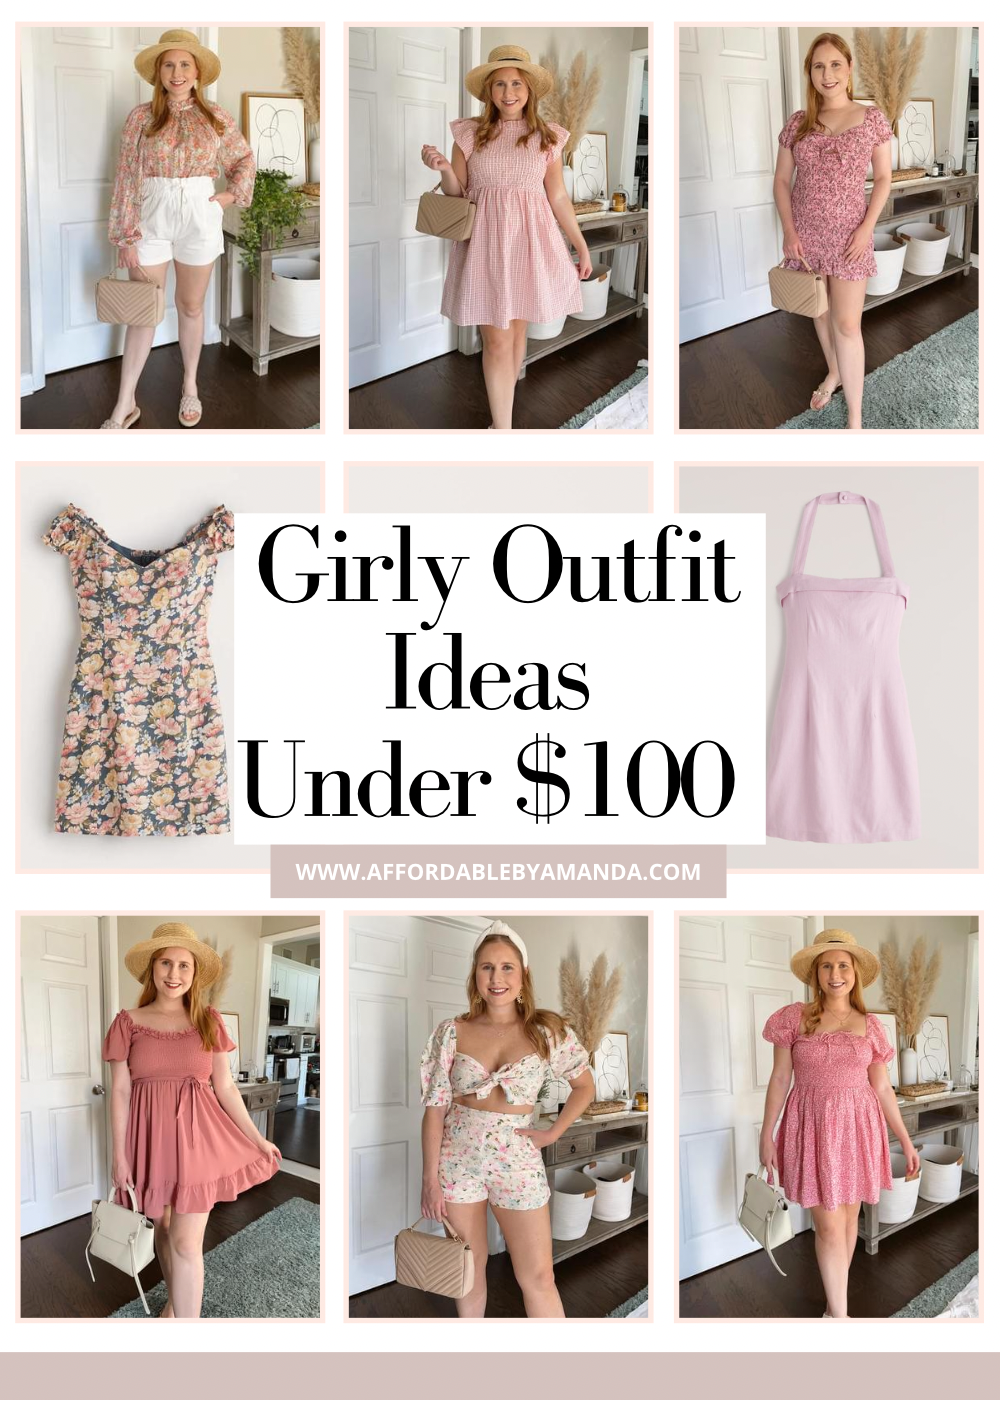 Girly Outfit Ideas Under $100 - Affordable by Amanda